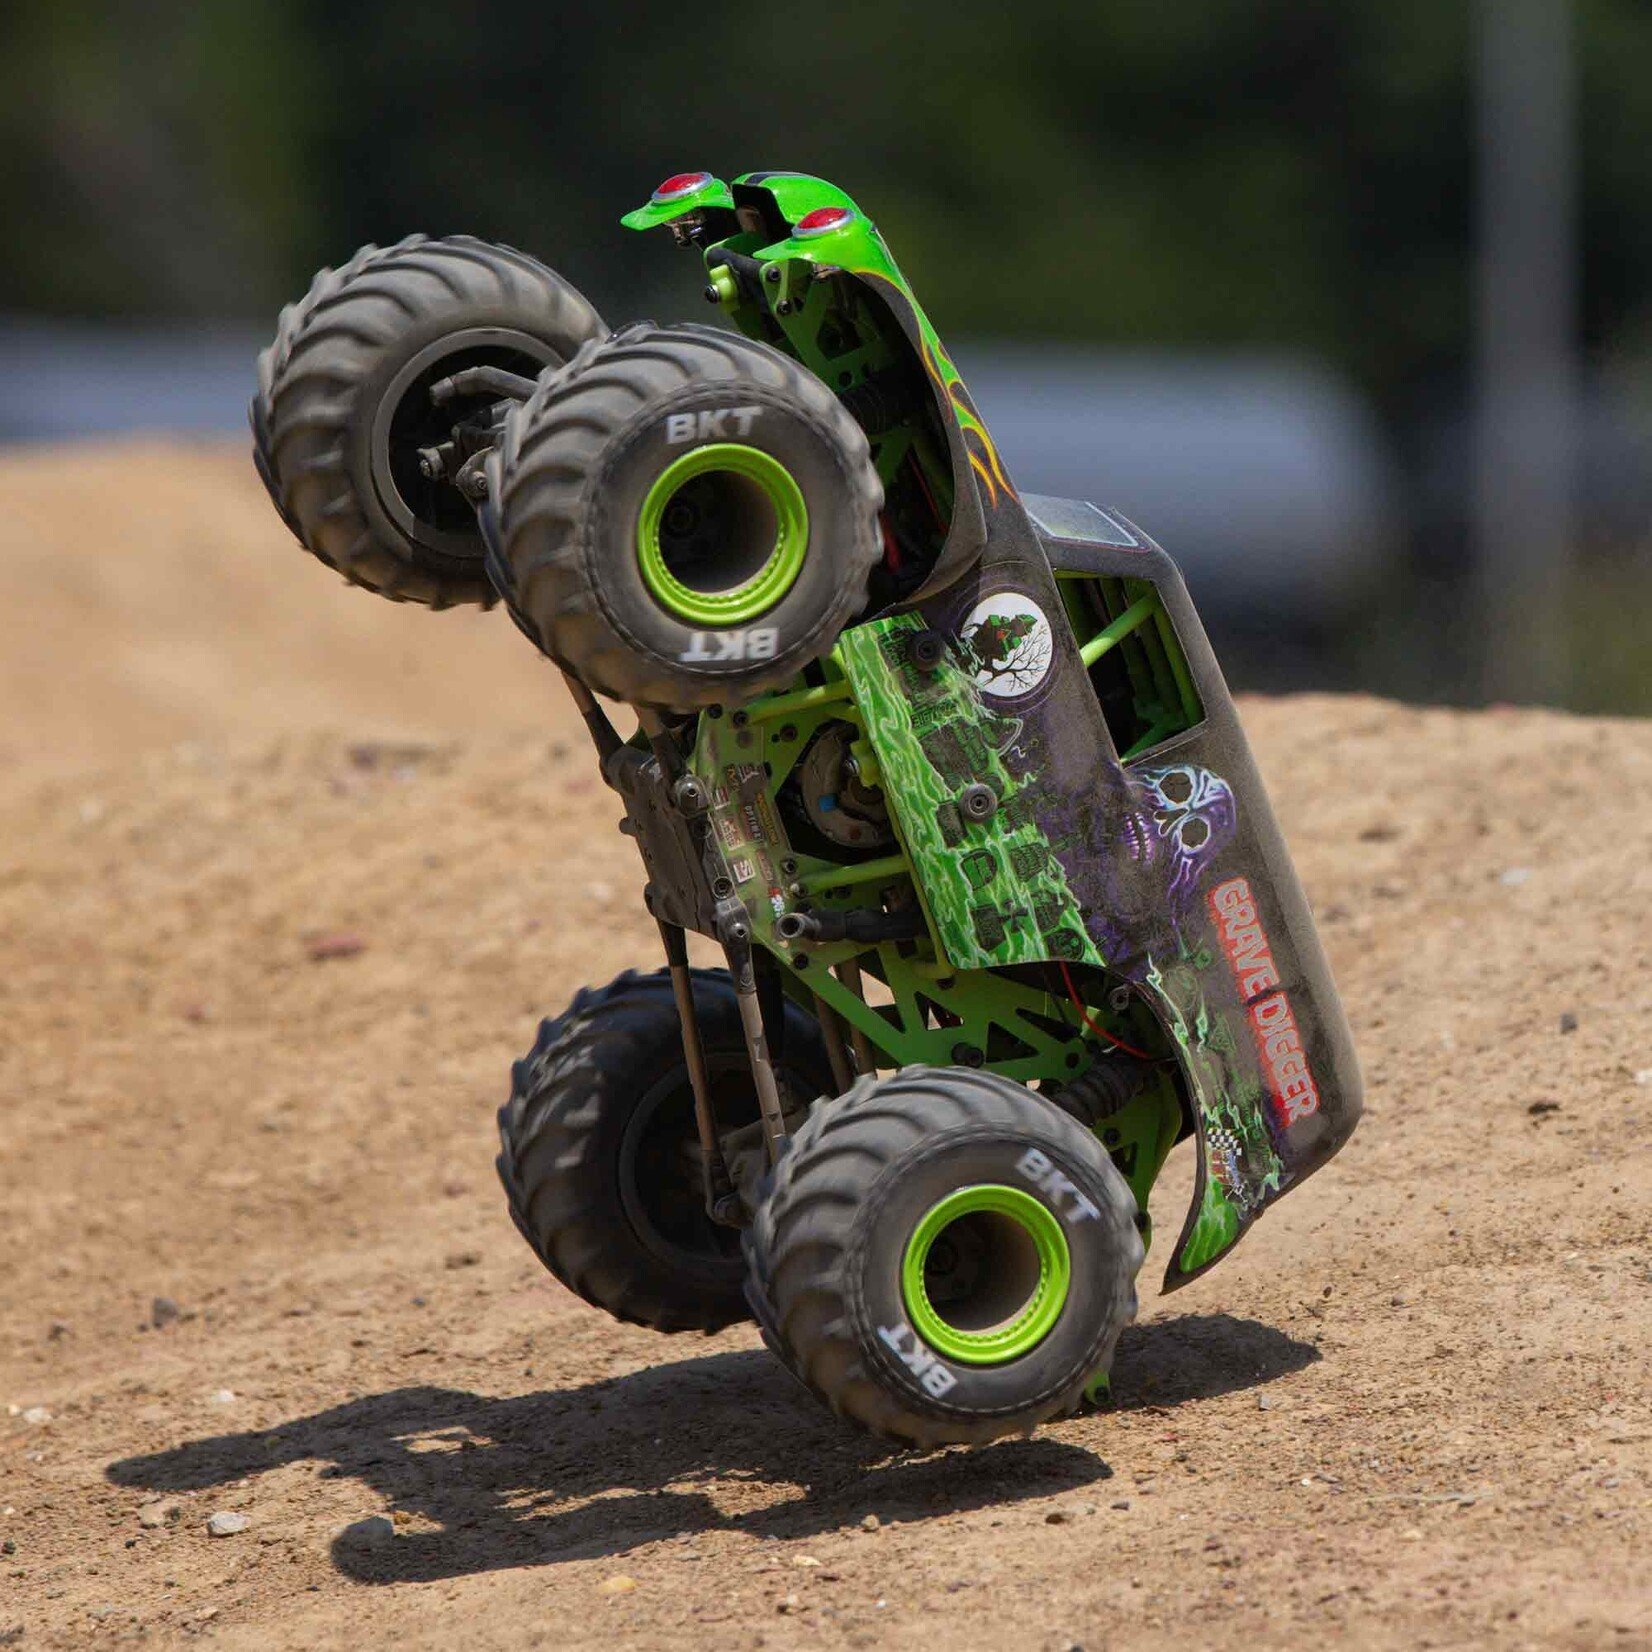 Losi 1/18 Mini LMT 4X4 Brushed Monster Truck RTR, Grave Digger